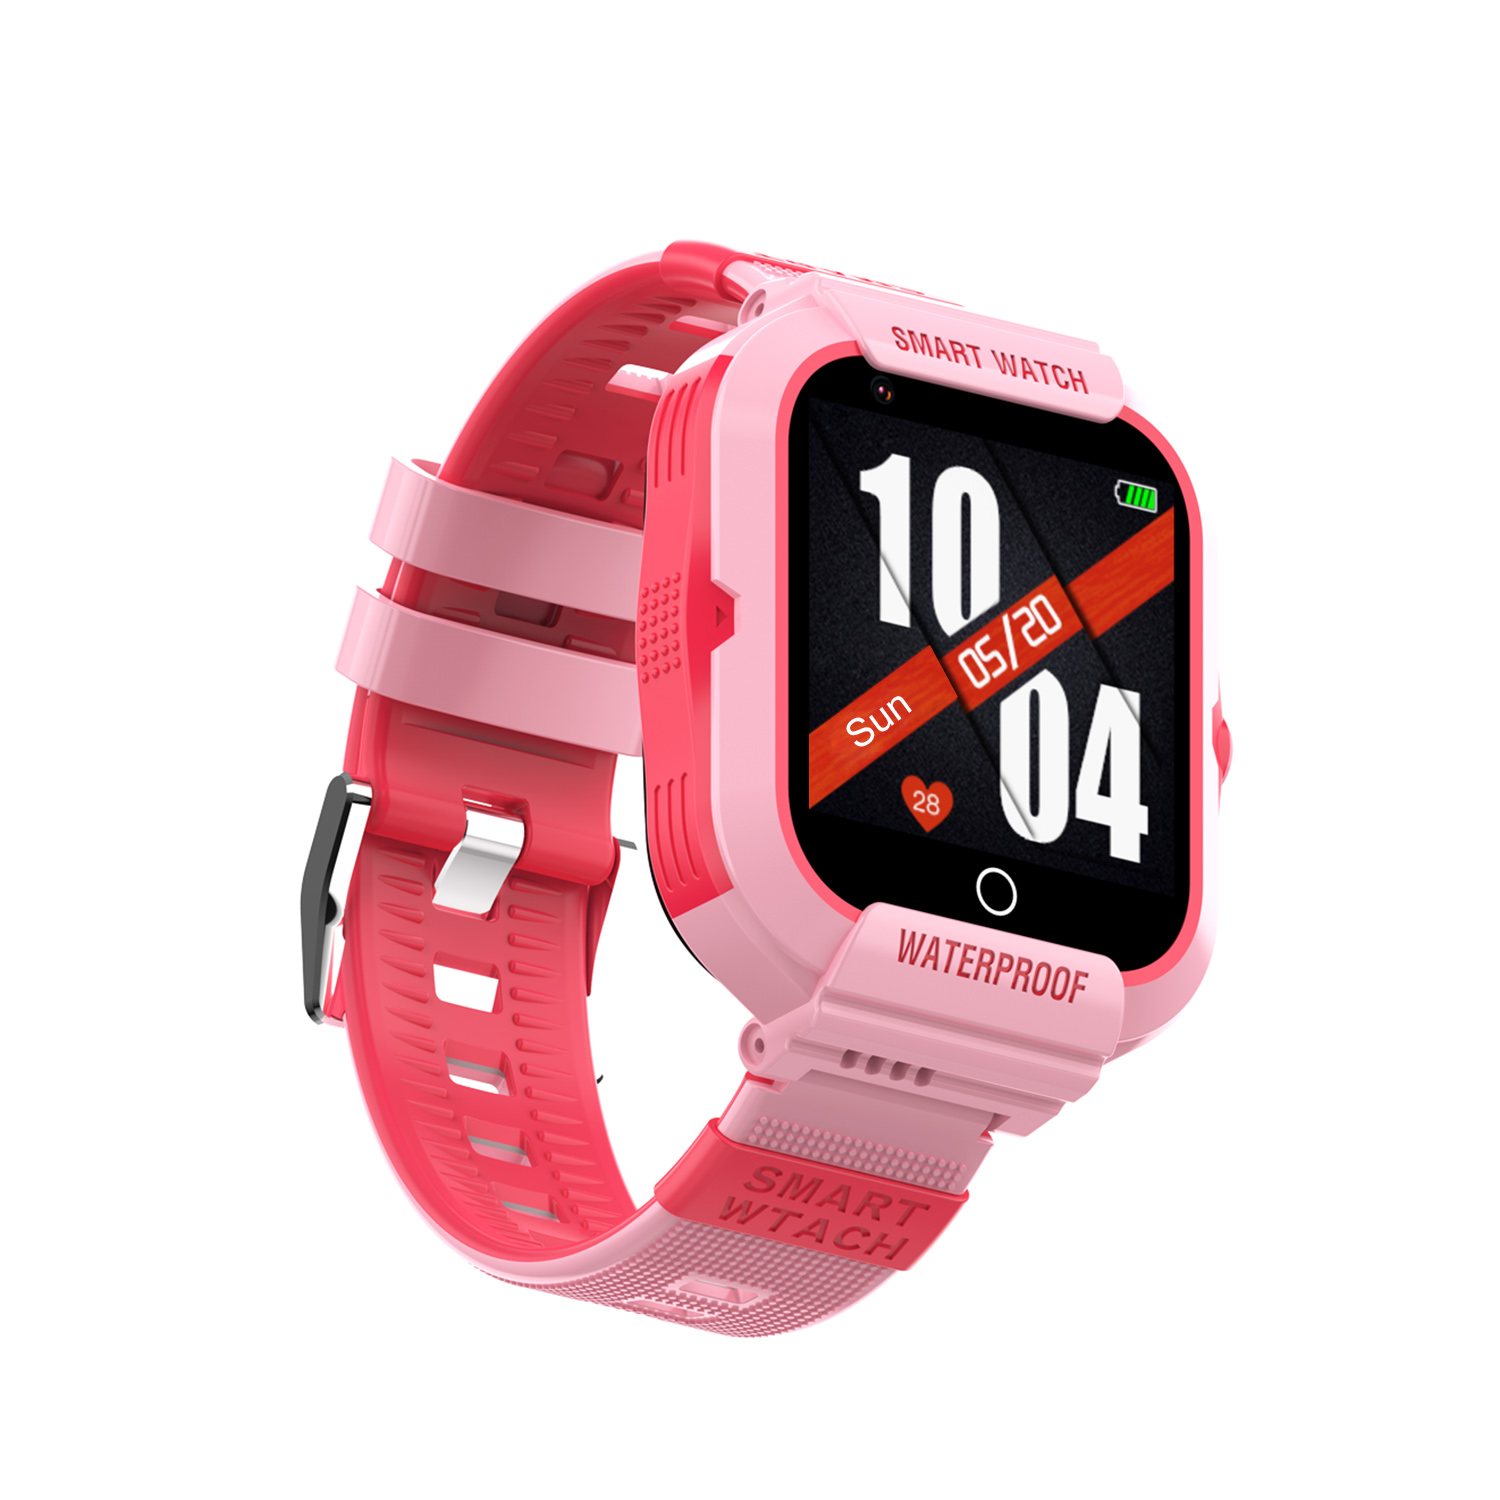 Quality 4G IP67 Waterproof Students GPS Tracker Watch with HD Camera for Snapshot Video call for personal security P42U